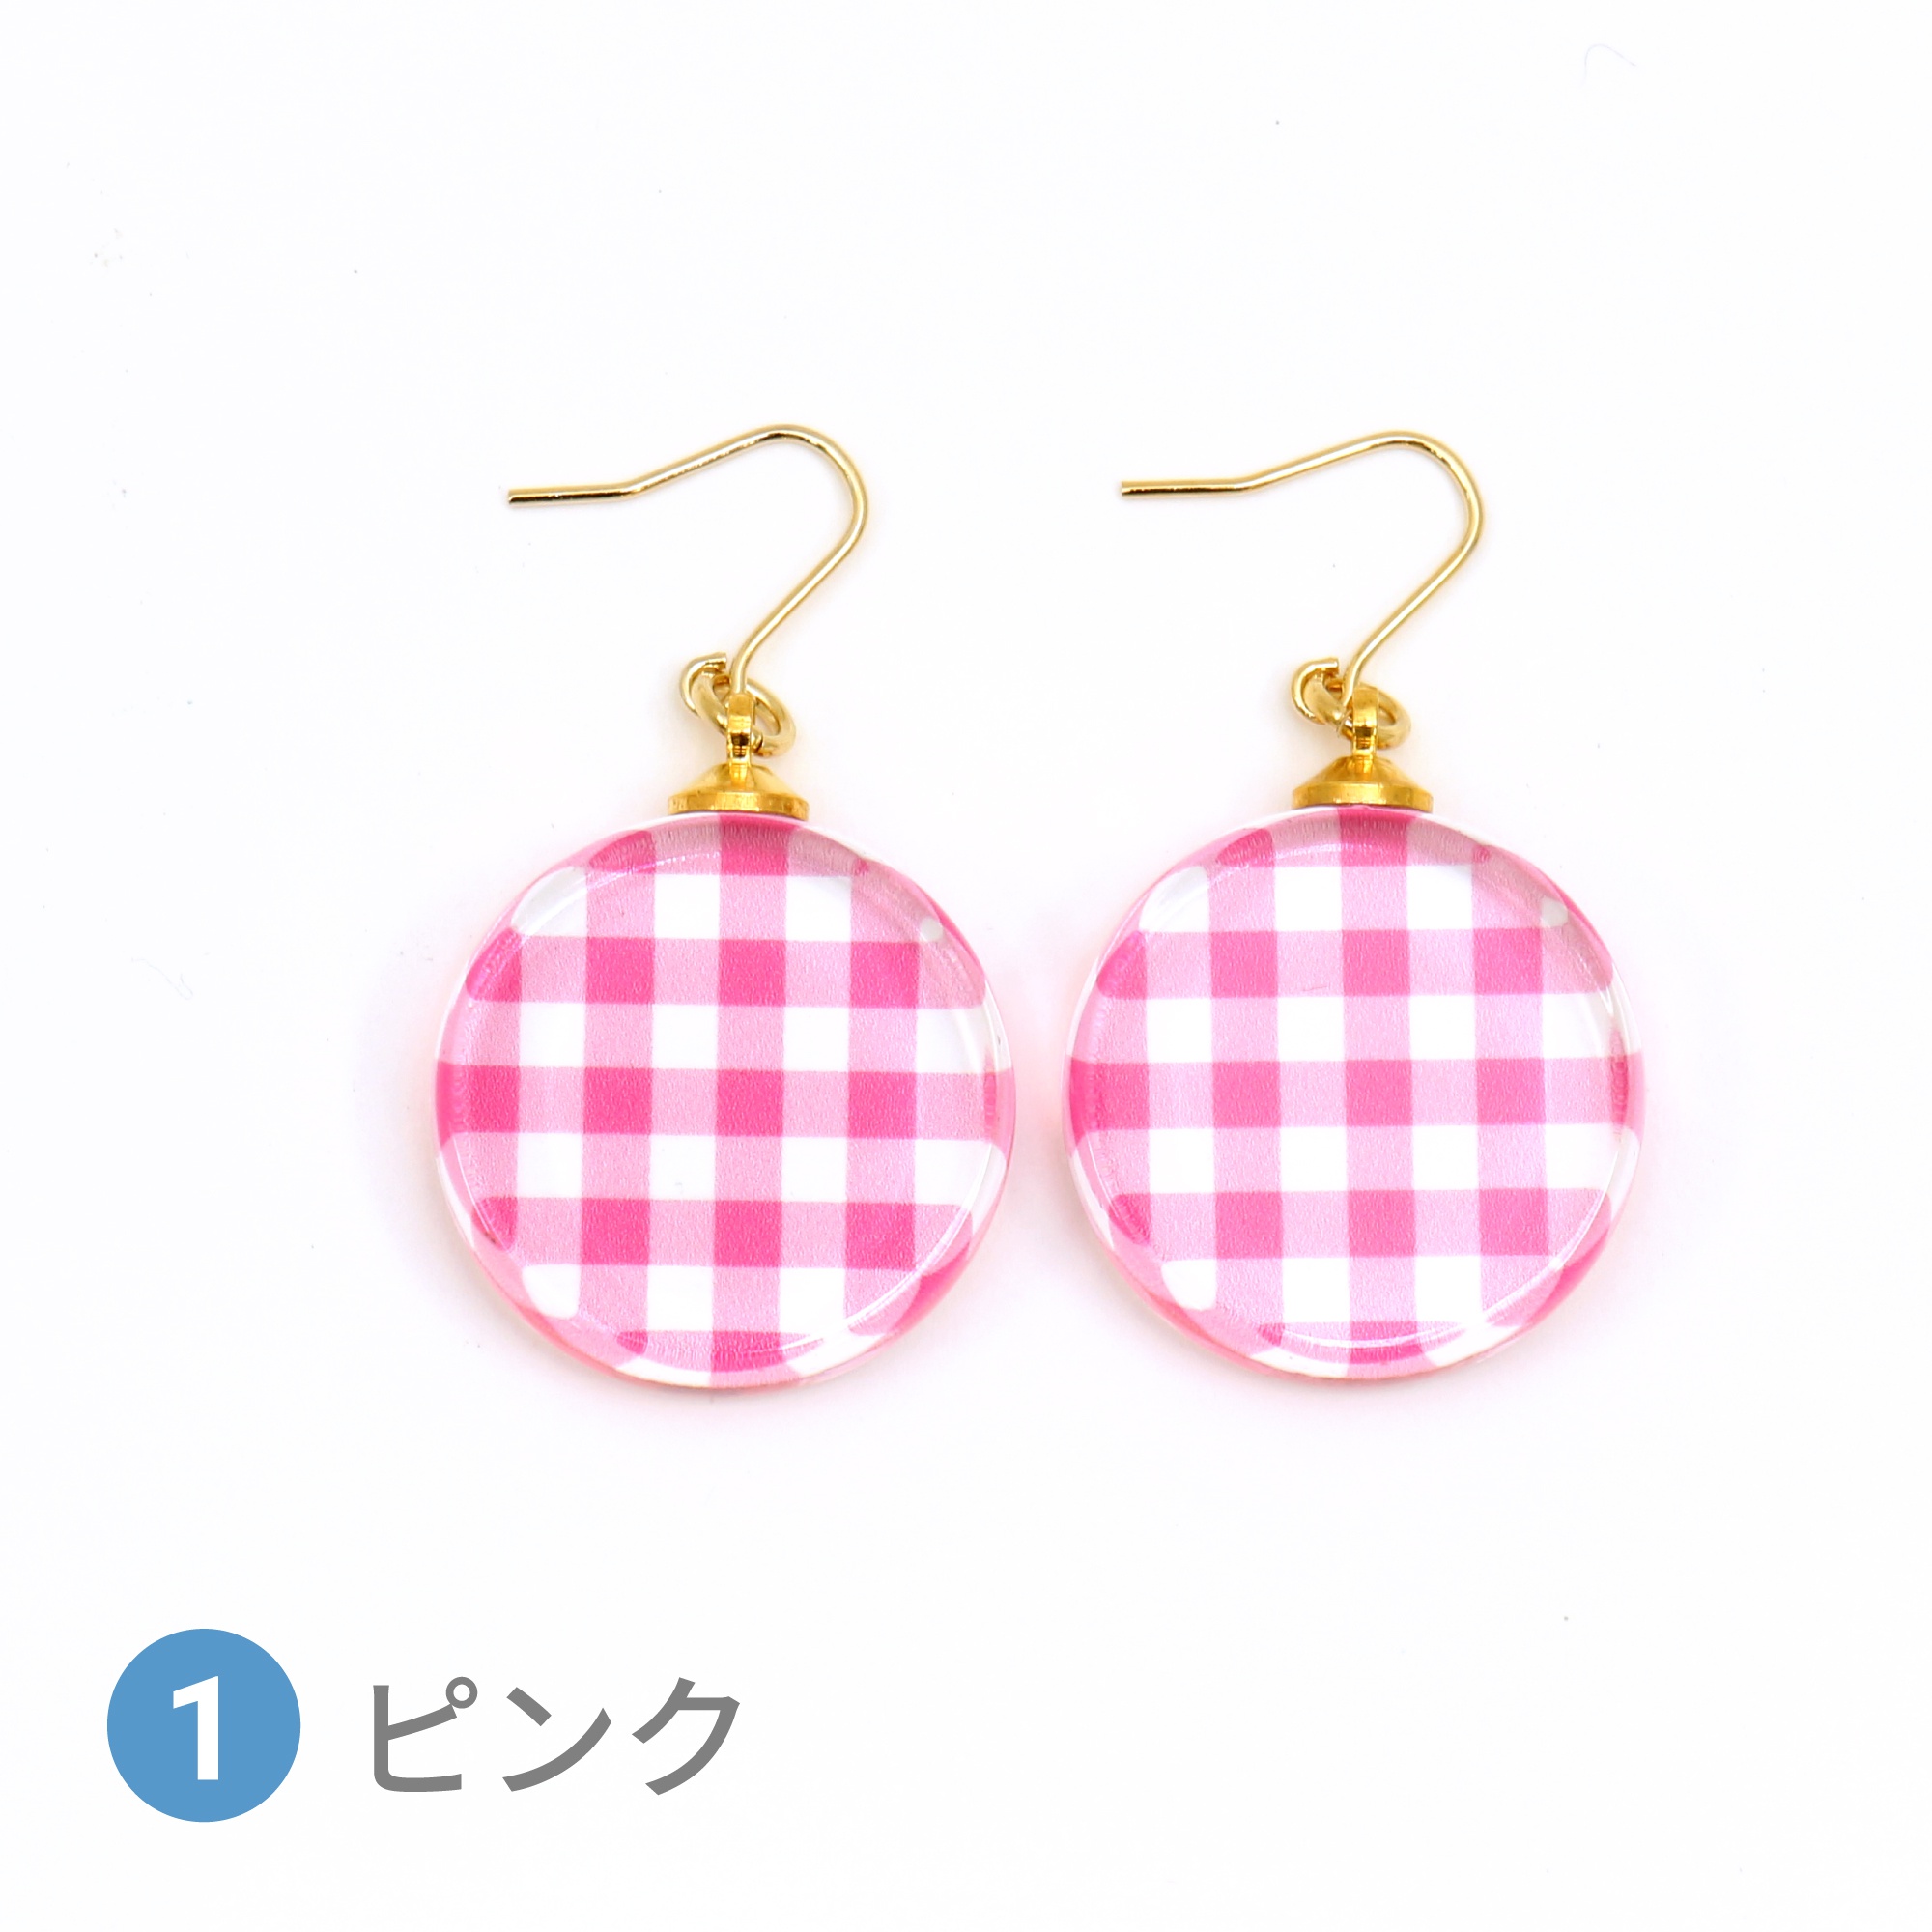 Glass accessories Pierced Earring GINGHAM CHECK pink round shape